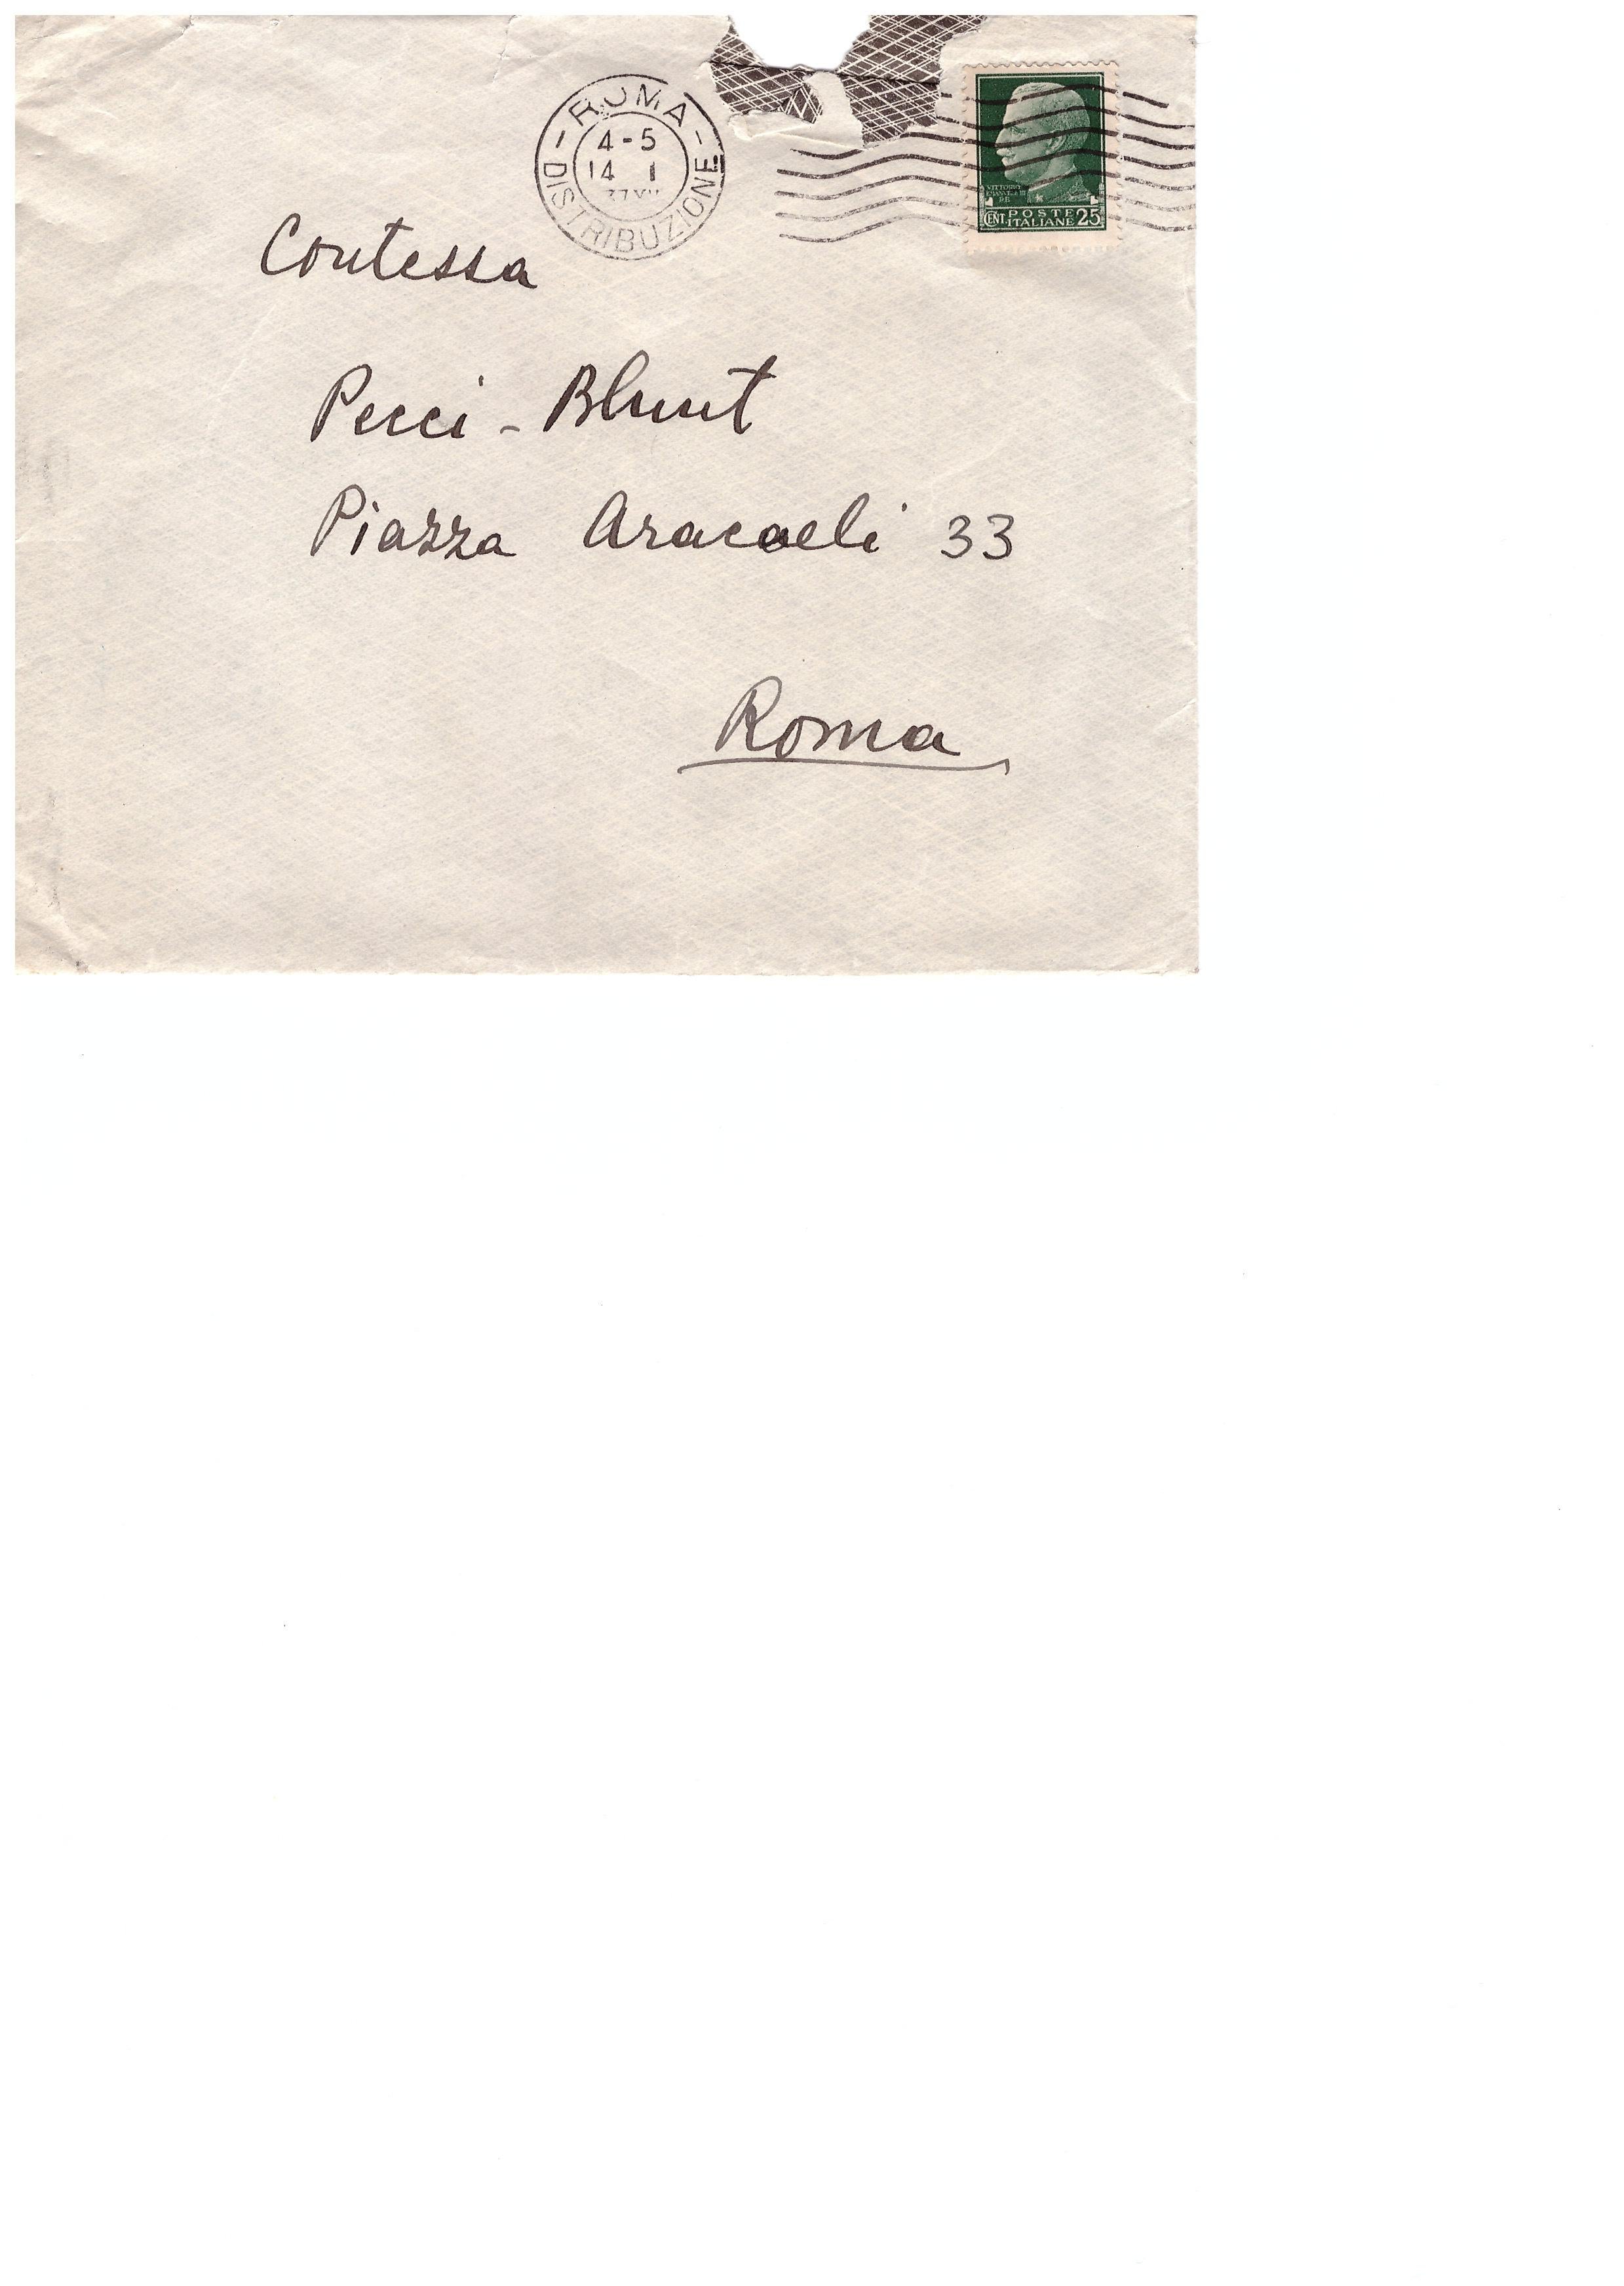 Letters by Milena Barilli to the Countess Pecci Blunt - 1943/1937 For Sale 3